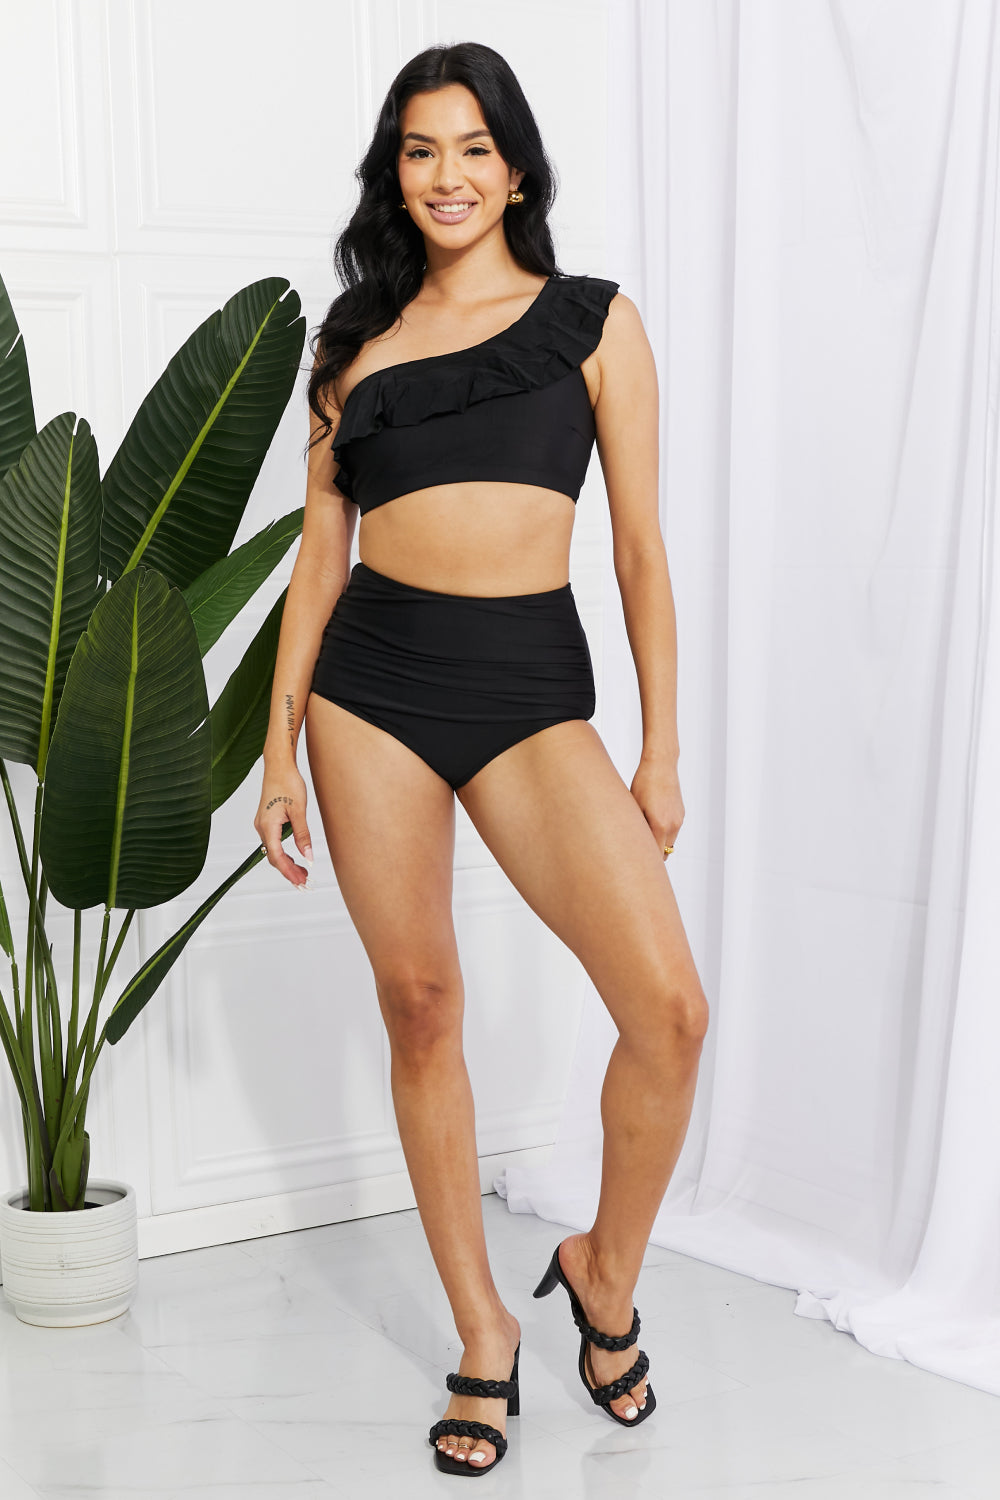 Off Shoulder Black High Waisted Bikini front full body view